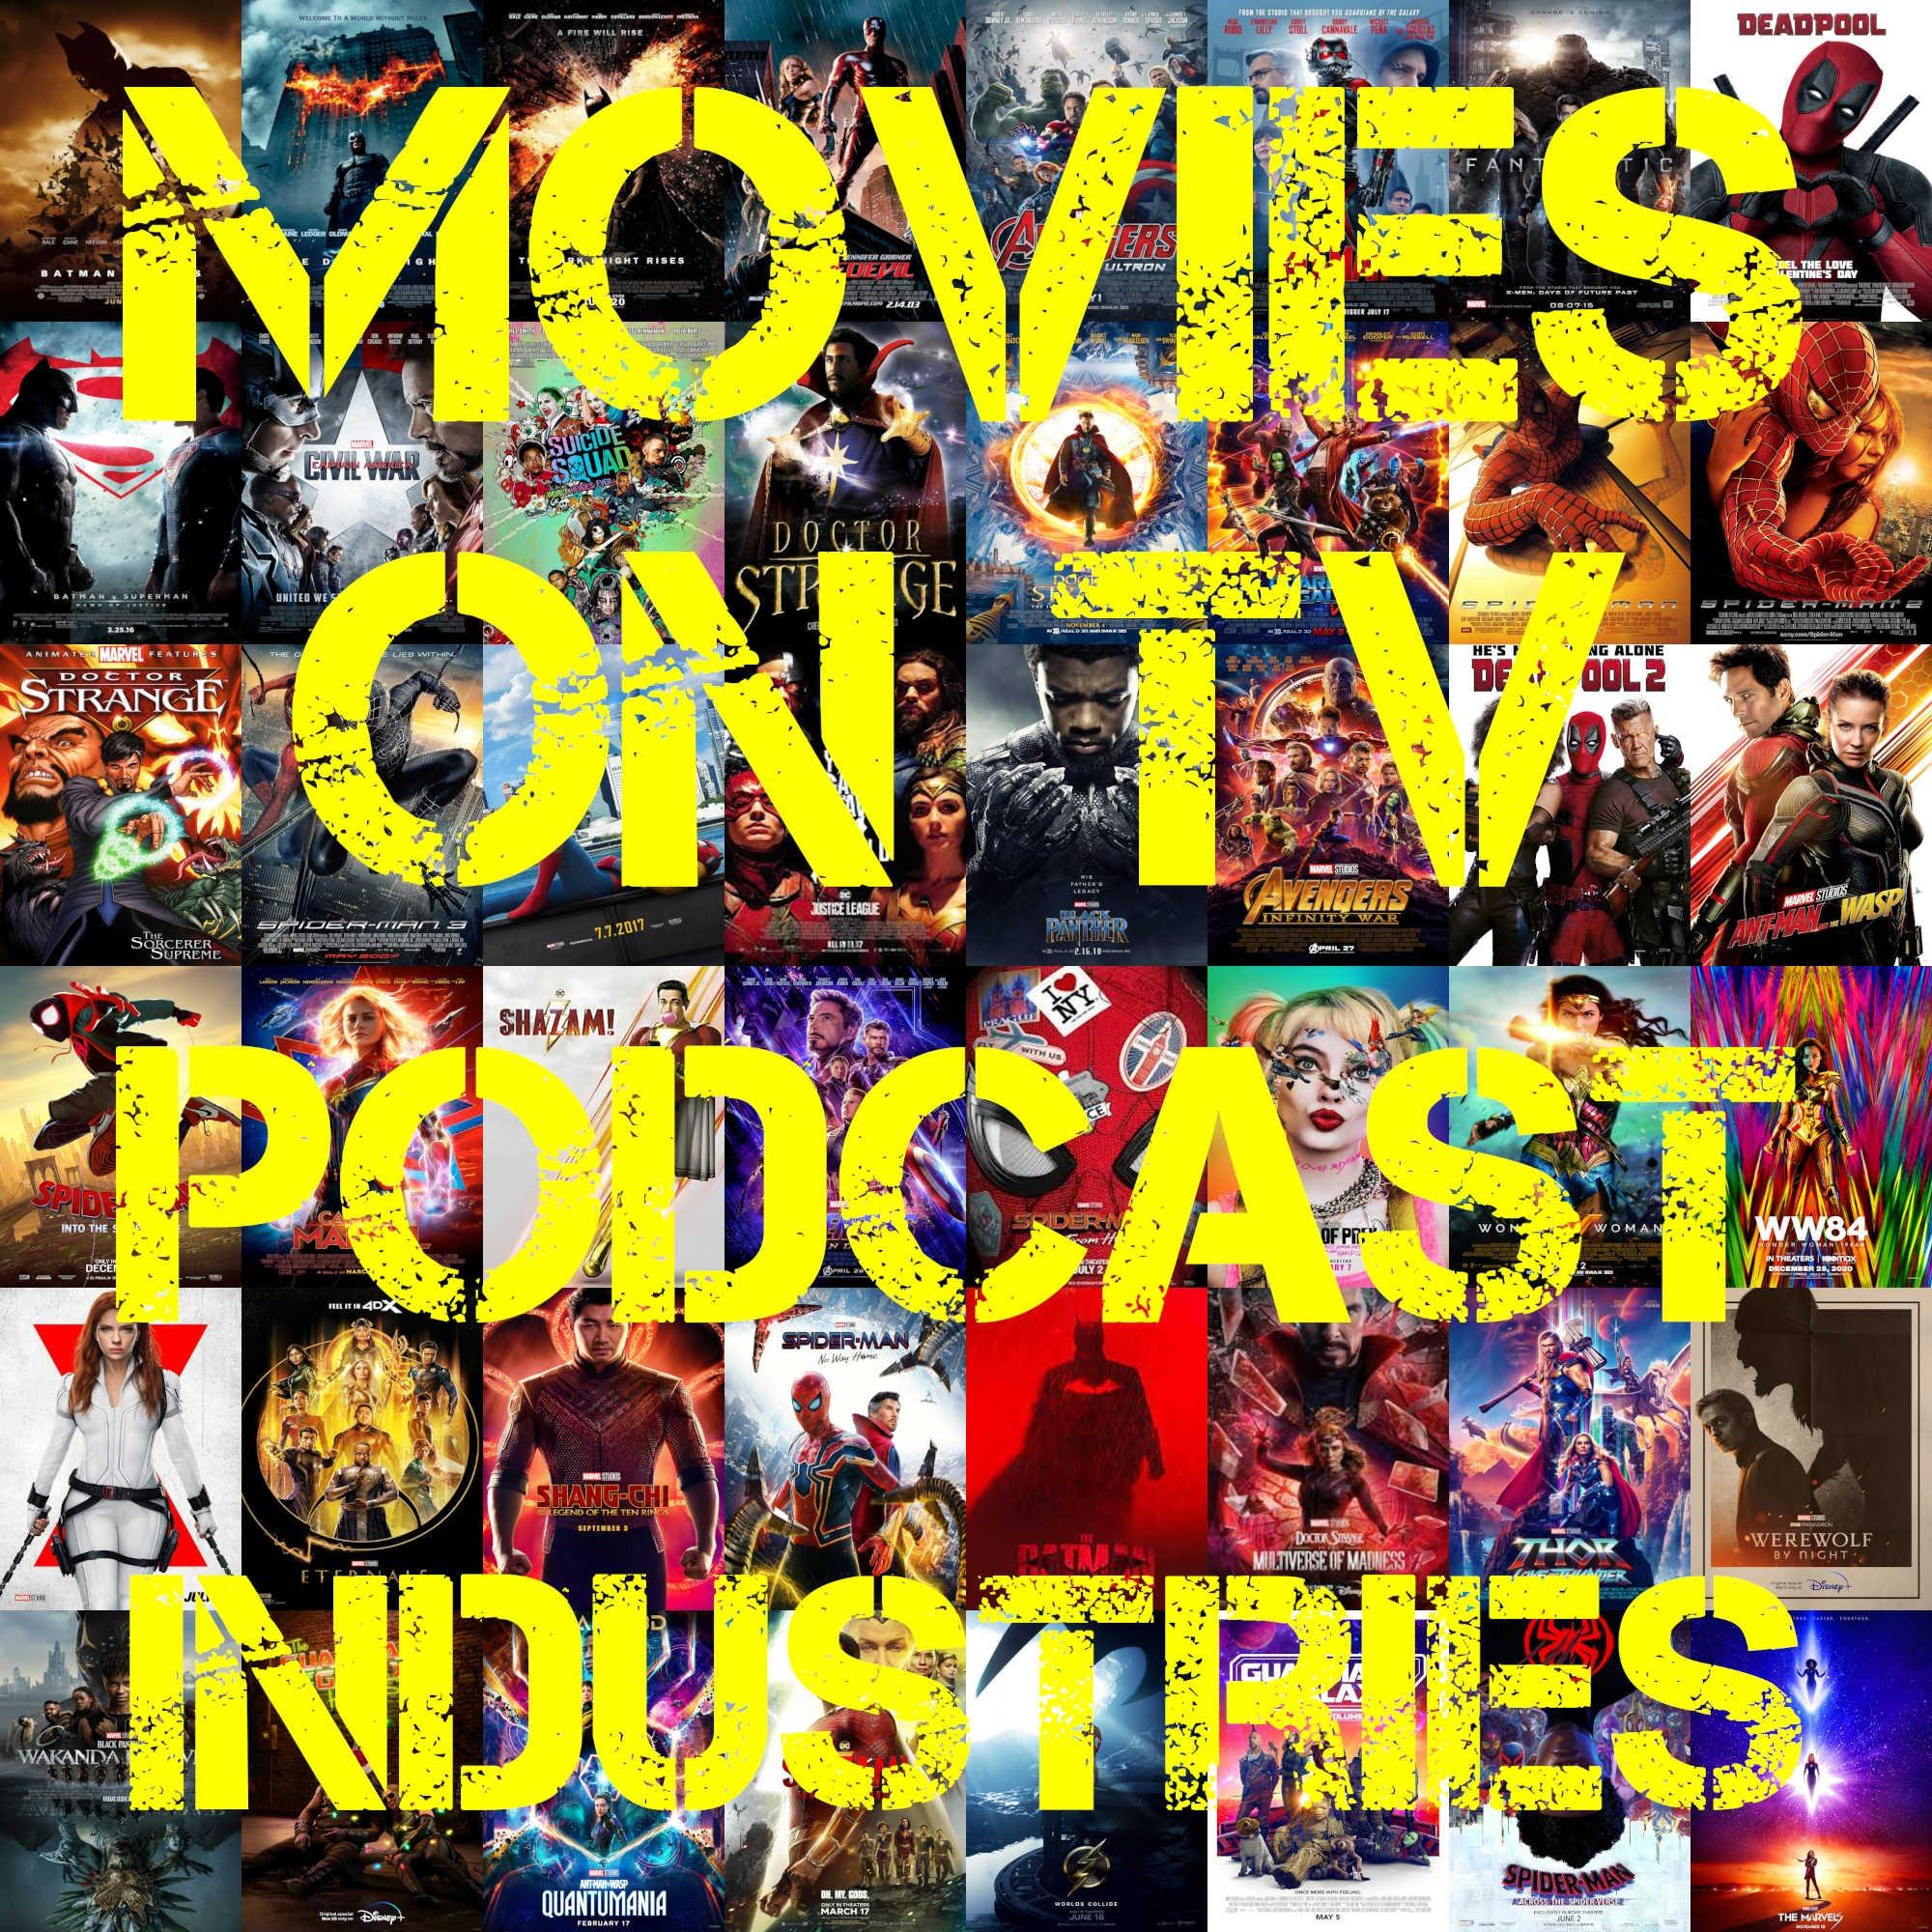 Movies on TV Podcast Industries